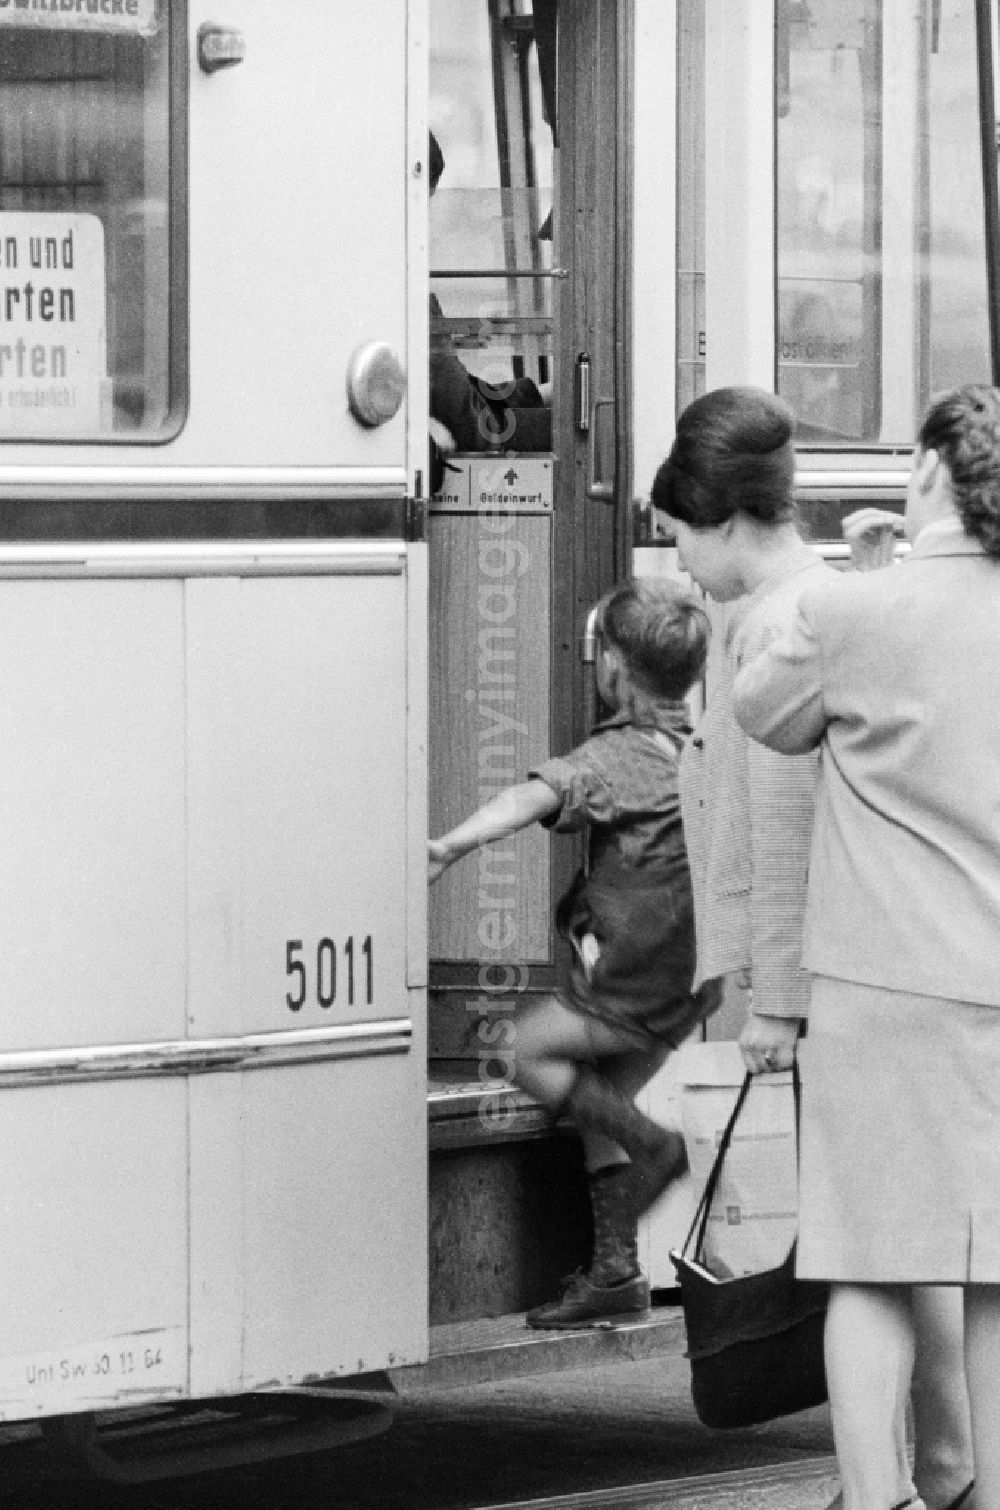 GDR image archive: Berlin - A Little Boy rises in a tram in Berlin, the former capital of the GDR, German Democratic Republic